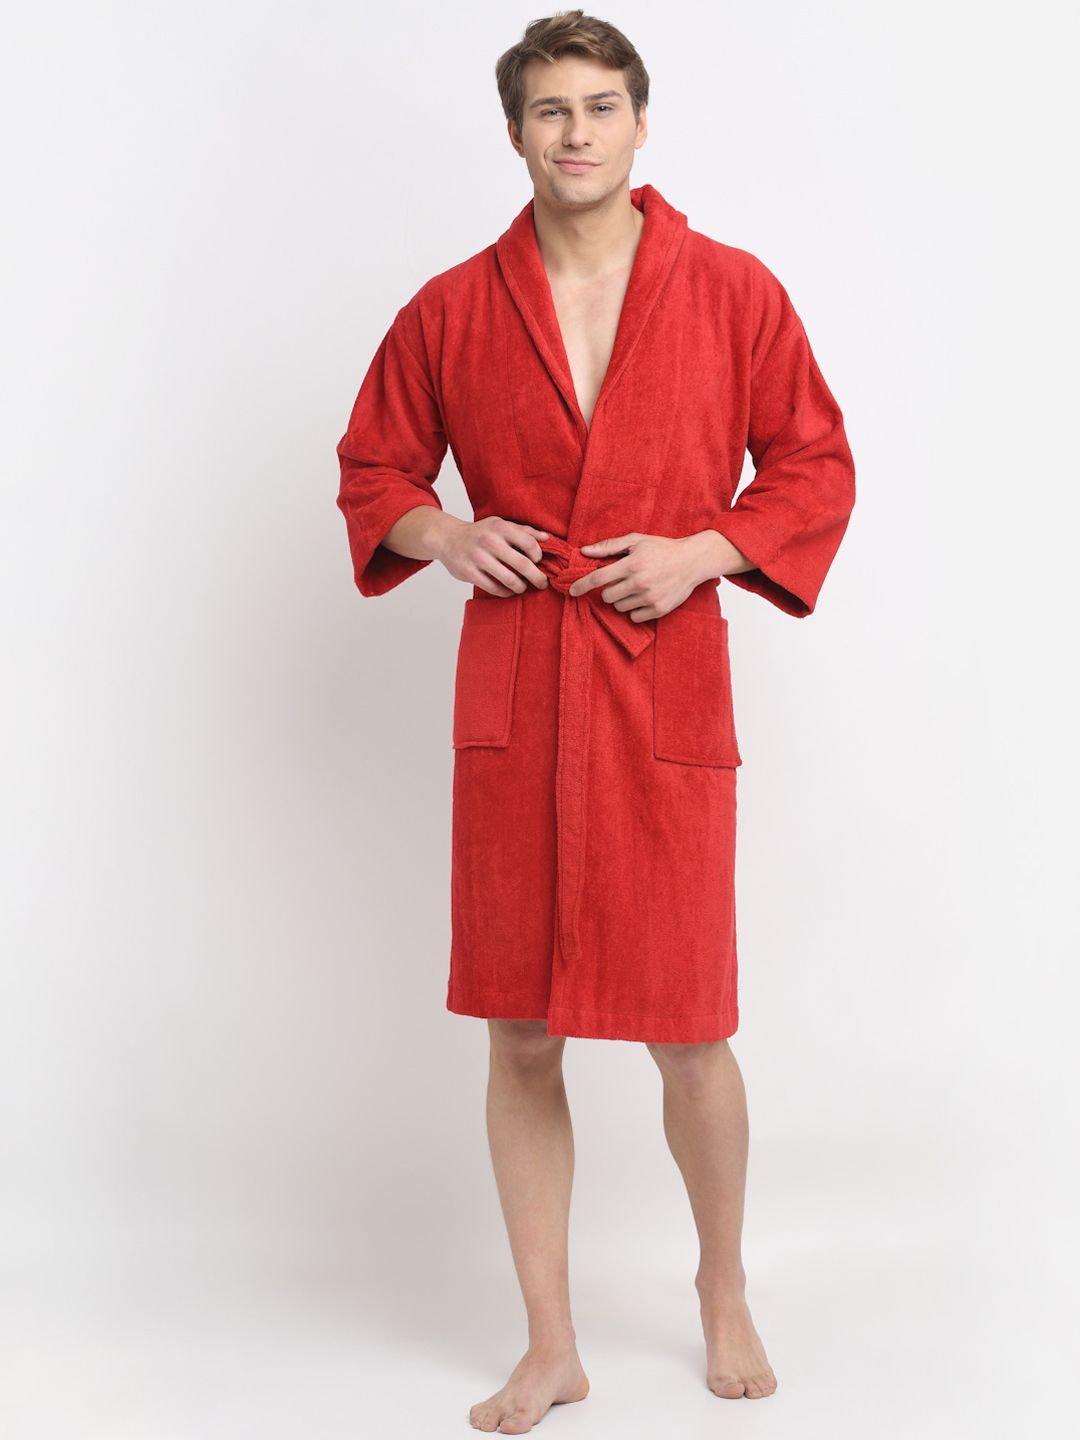 Creeva Unisex Red Solid Bathrobe With Pockets Price in India